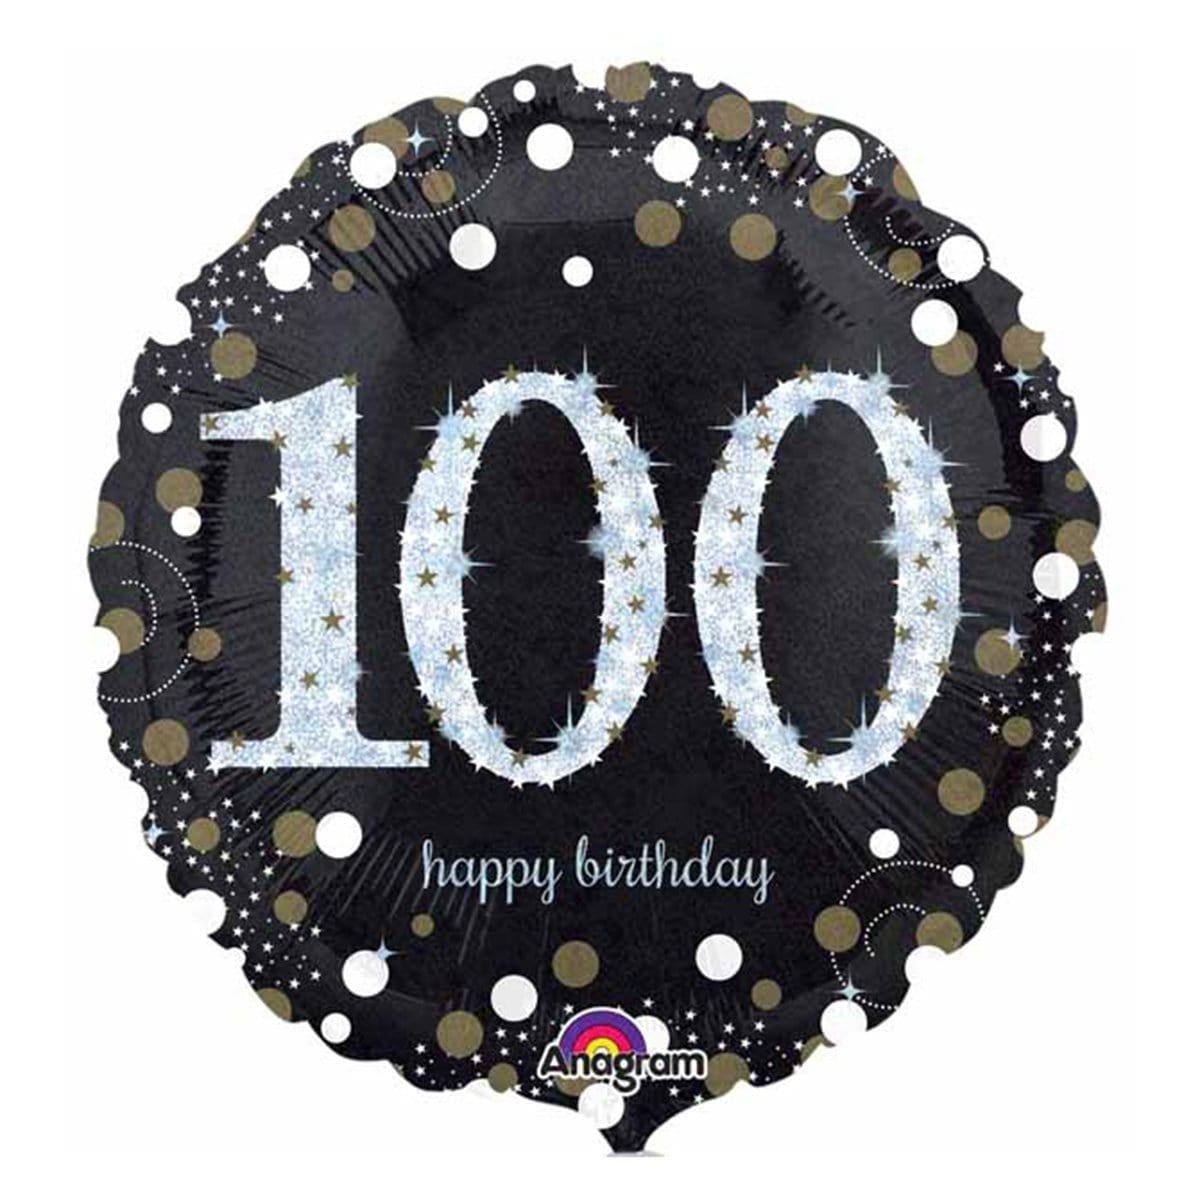 Buy Balloons Black And Gold 100th Birthday Foil Balloon, 18 Inches sold at Party Expert